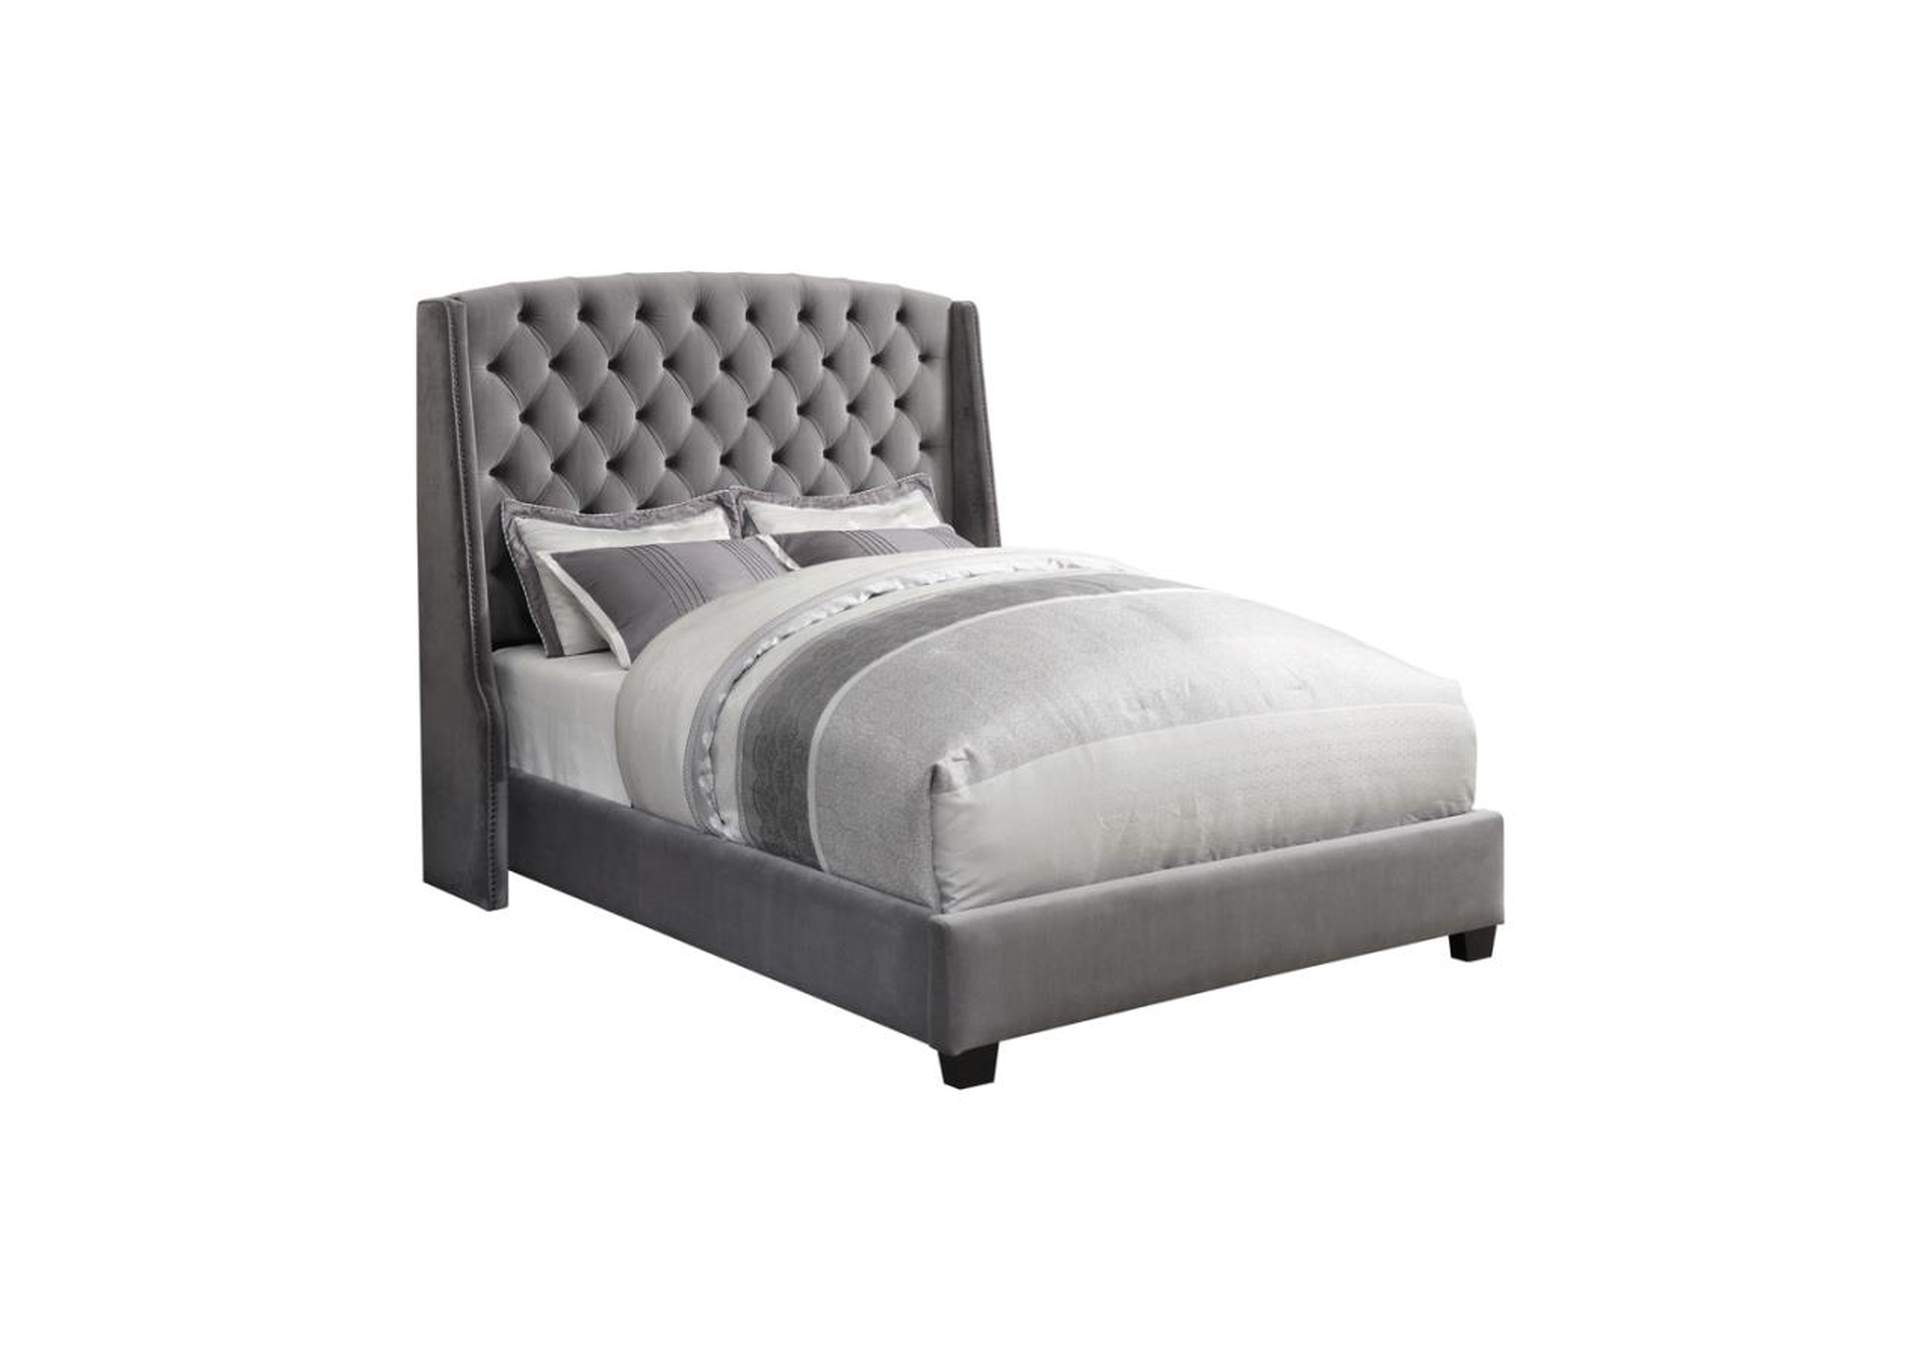 Pissarro Queen Tufted Upholstered Bed Grey,Coaster Furniture